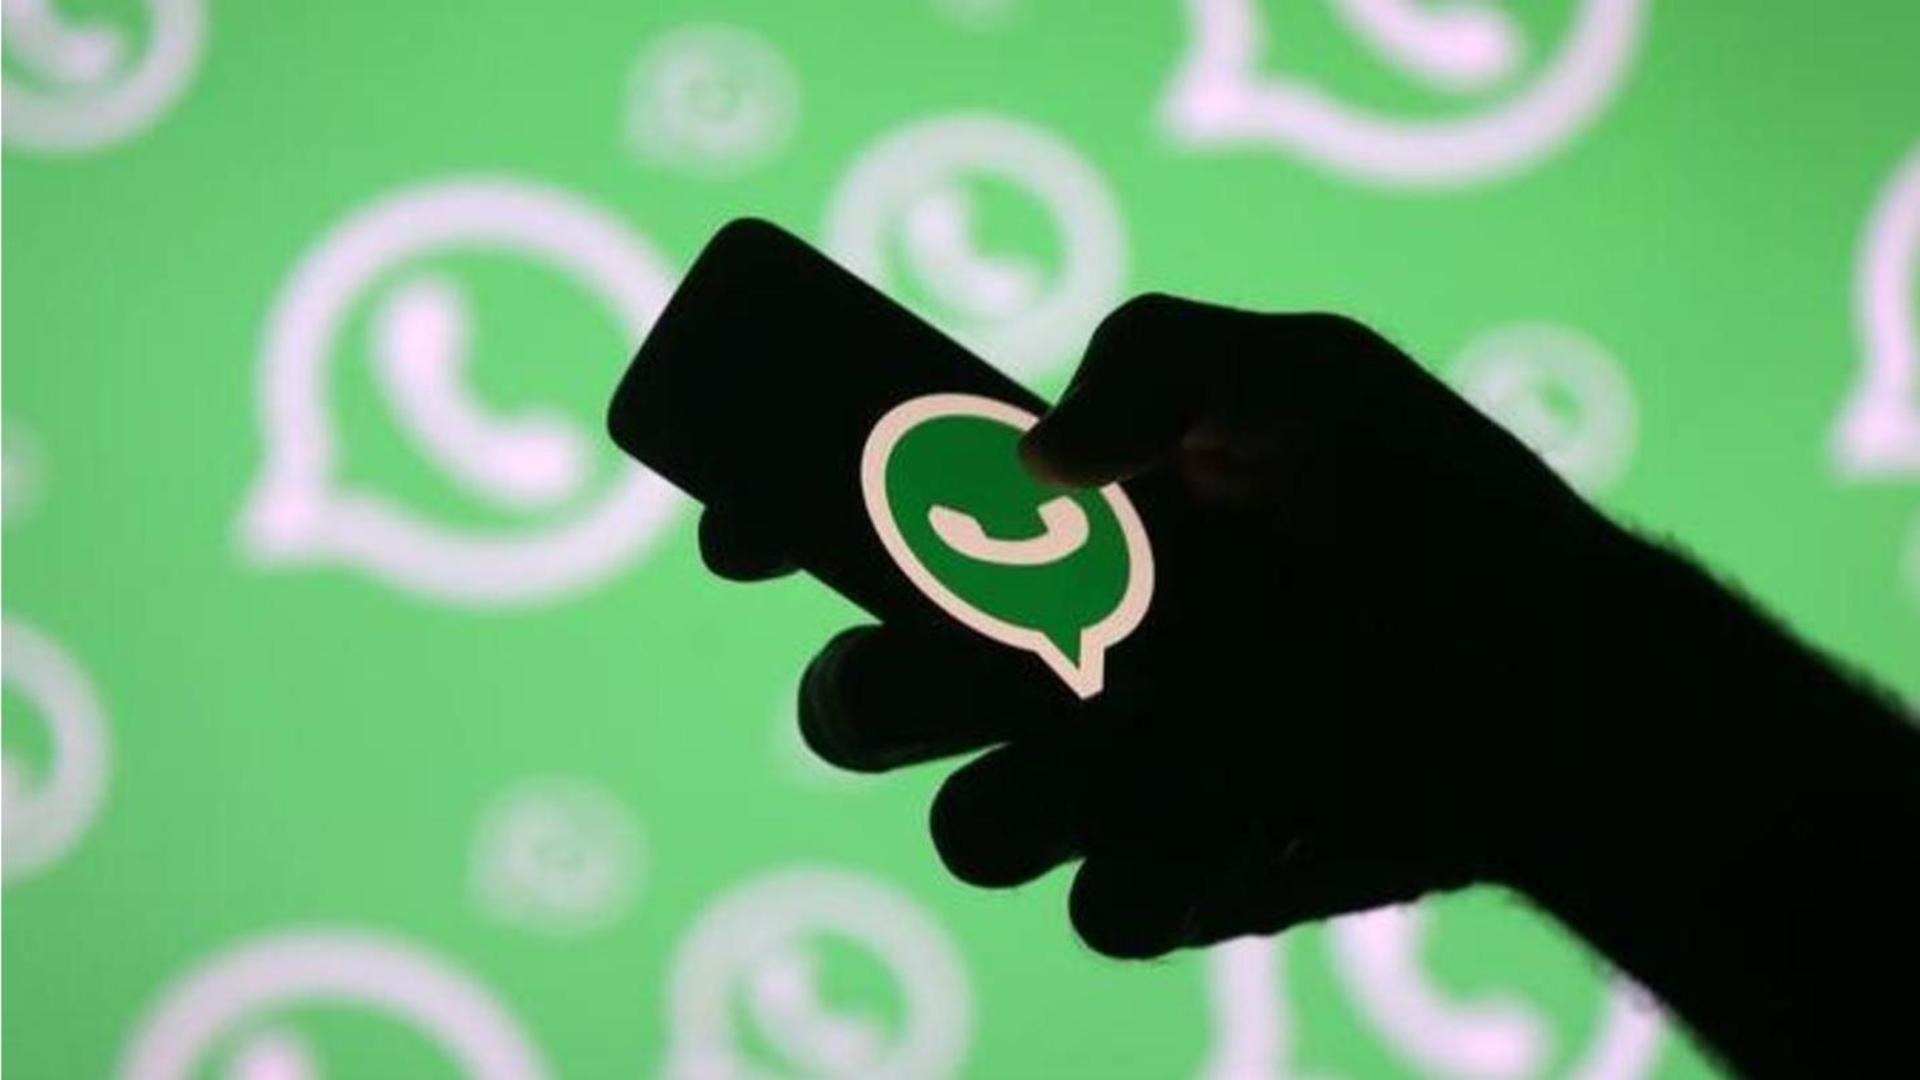 WhatsApp banned over 47 lakh Indian accounts in March: Report